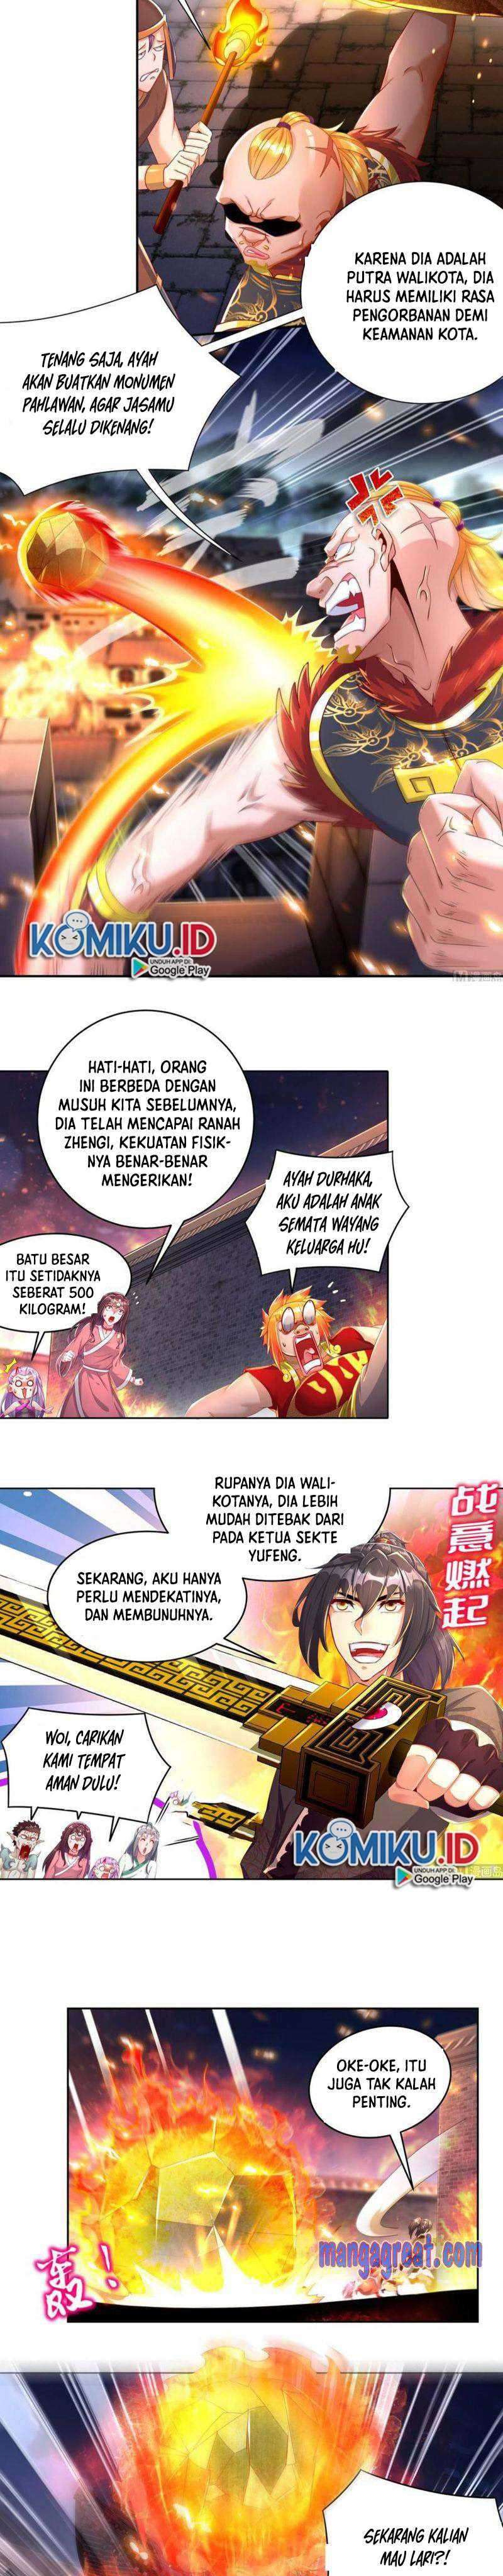 Rebirth of the Demon Reign (The Rebirth of the Demon God) Chapter 87